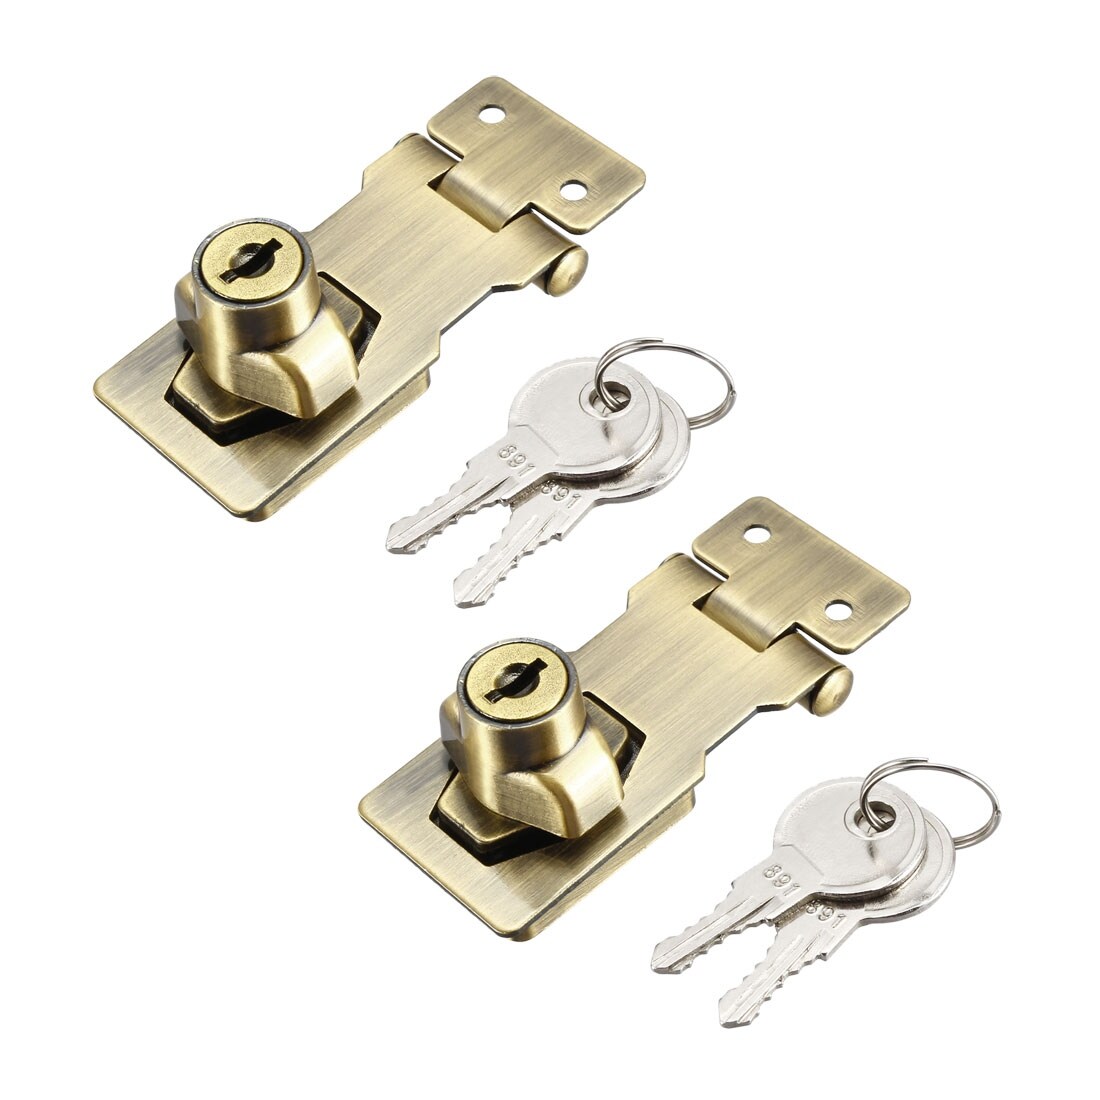 2pcs Zinc Alloy 90 Degree Locks with keys for securing Wooden Doors Box Cabinet 